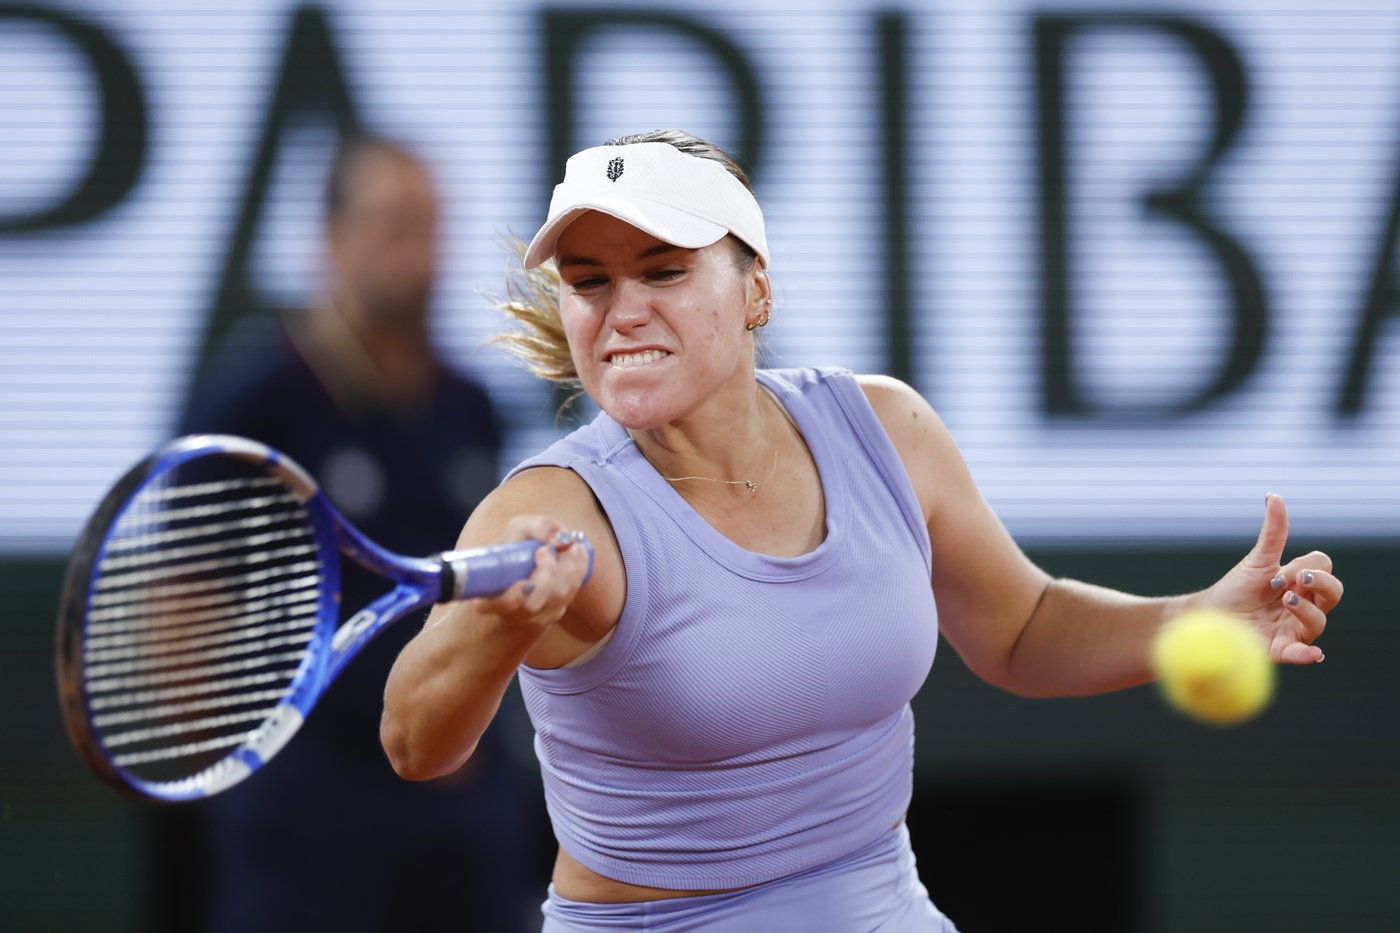 Sofia Kenin was 413 before the French Open. Now she is into the third